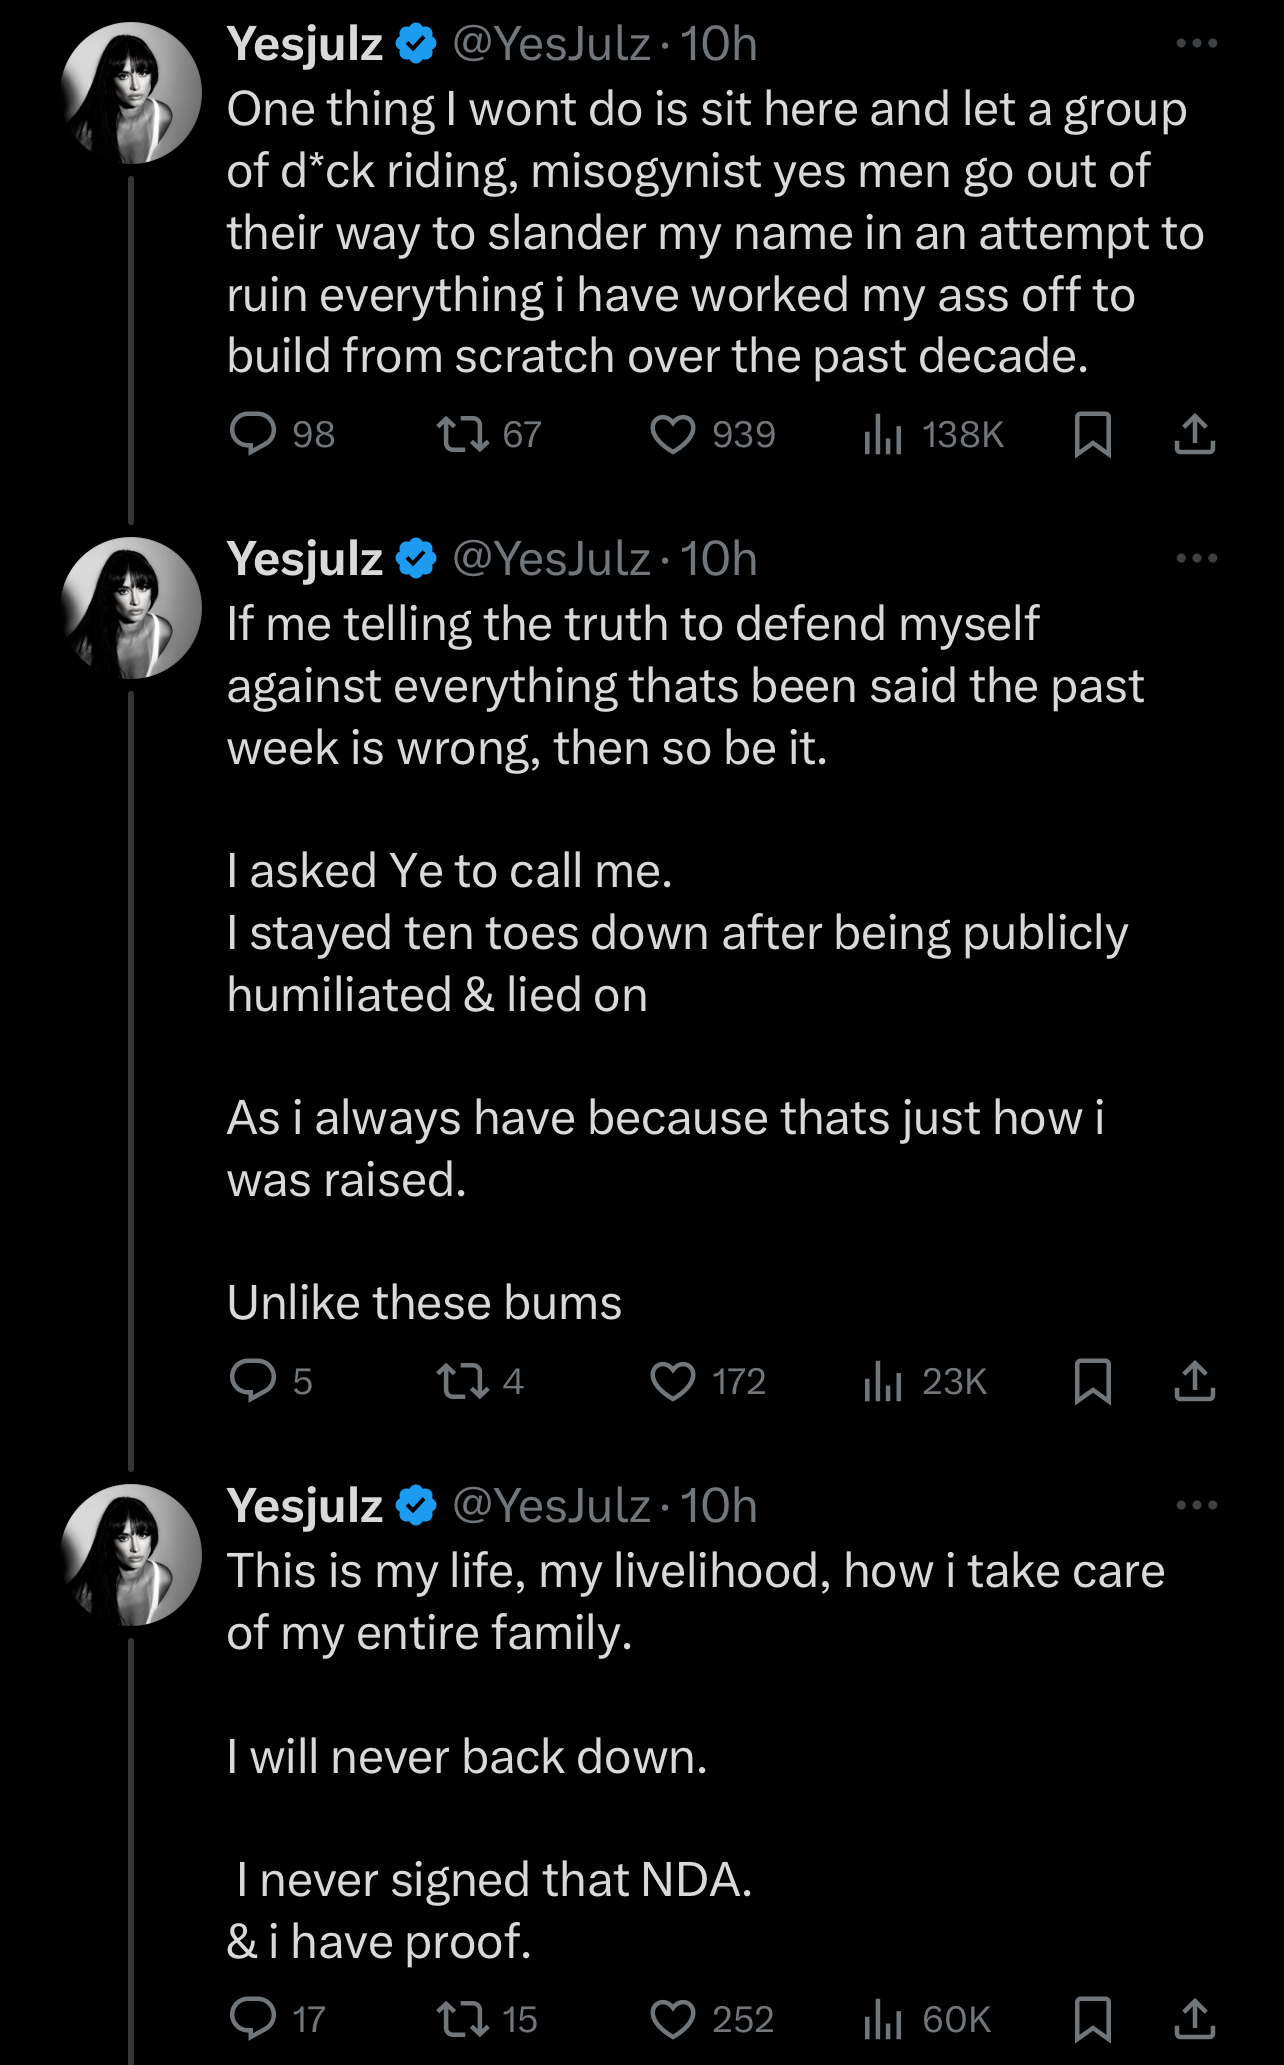 A series of tweets from YesJulz discussing overcoming negativity, being undeterred by public humiliation, and staying true to oneself